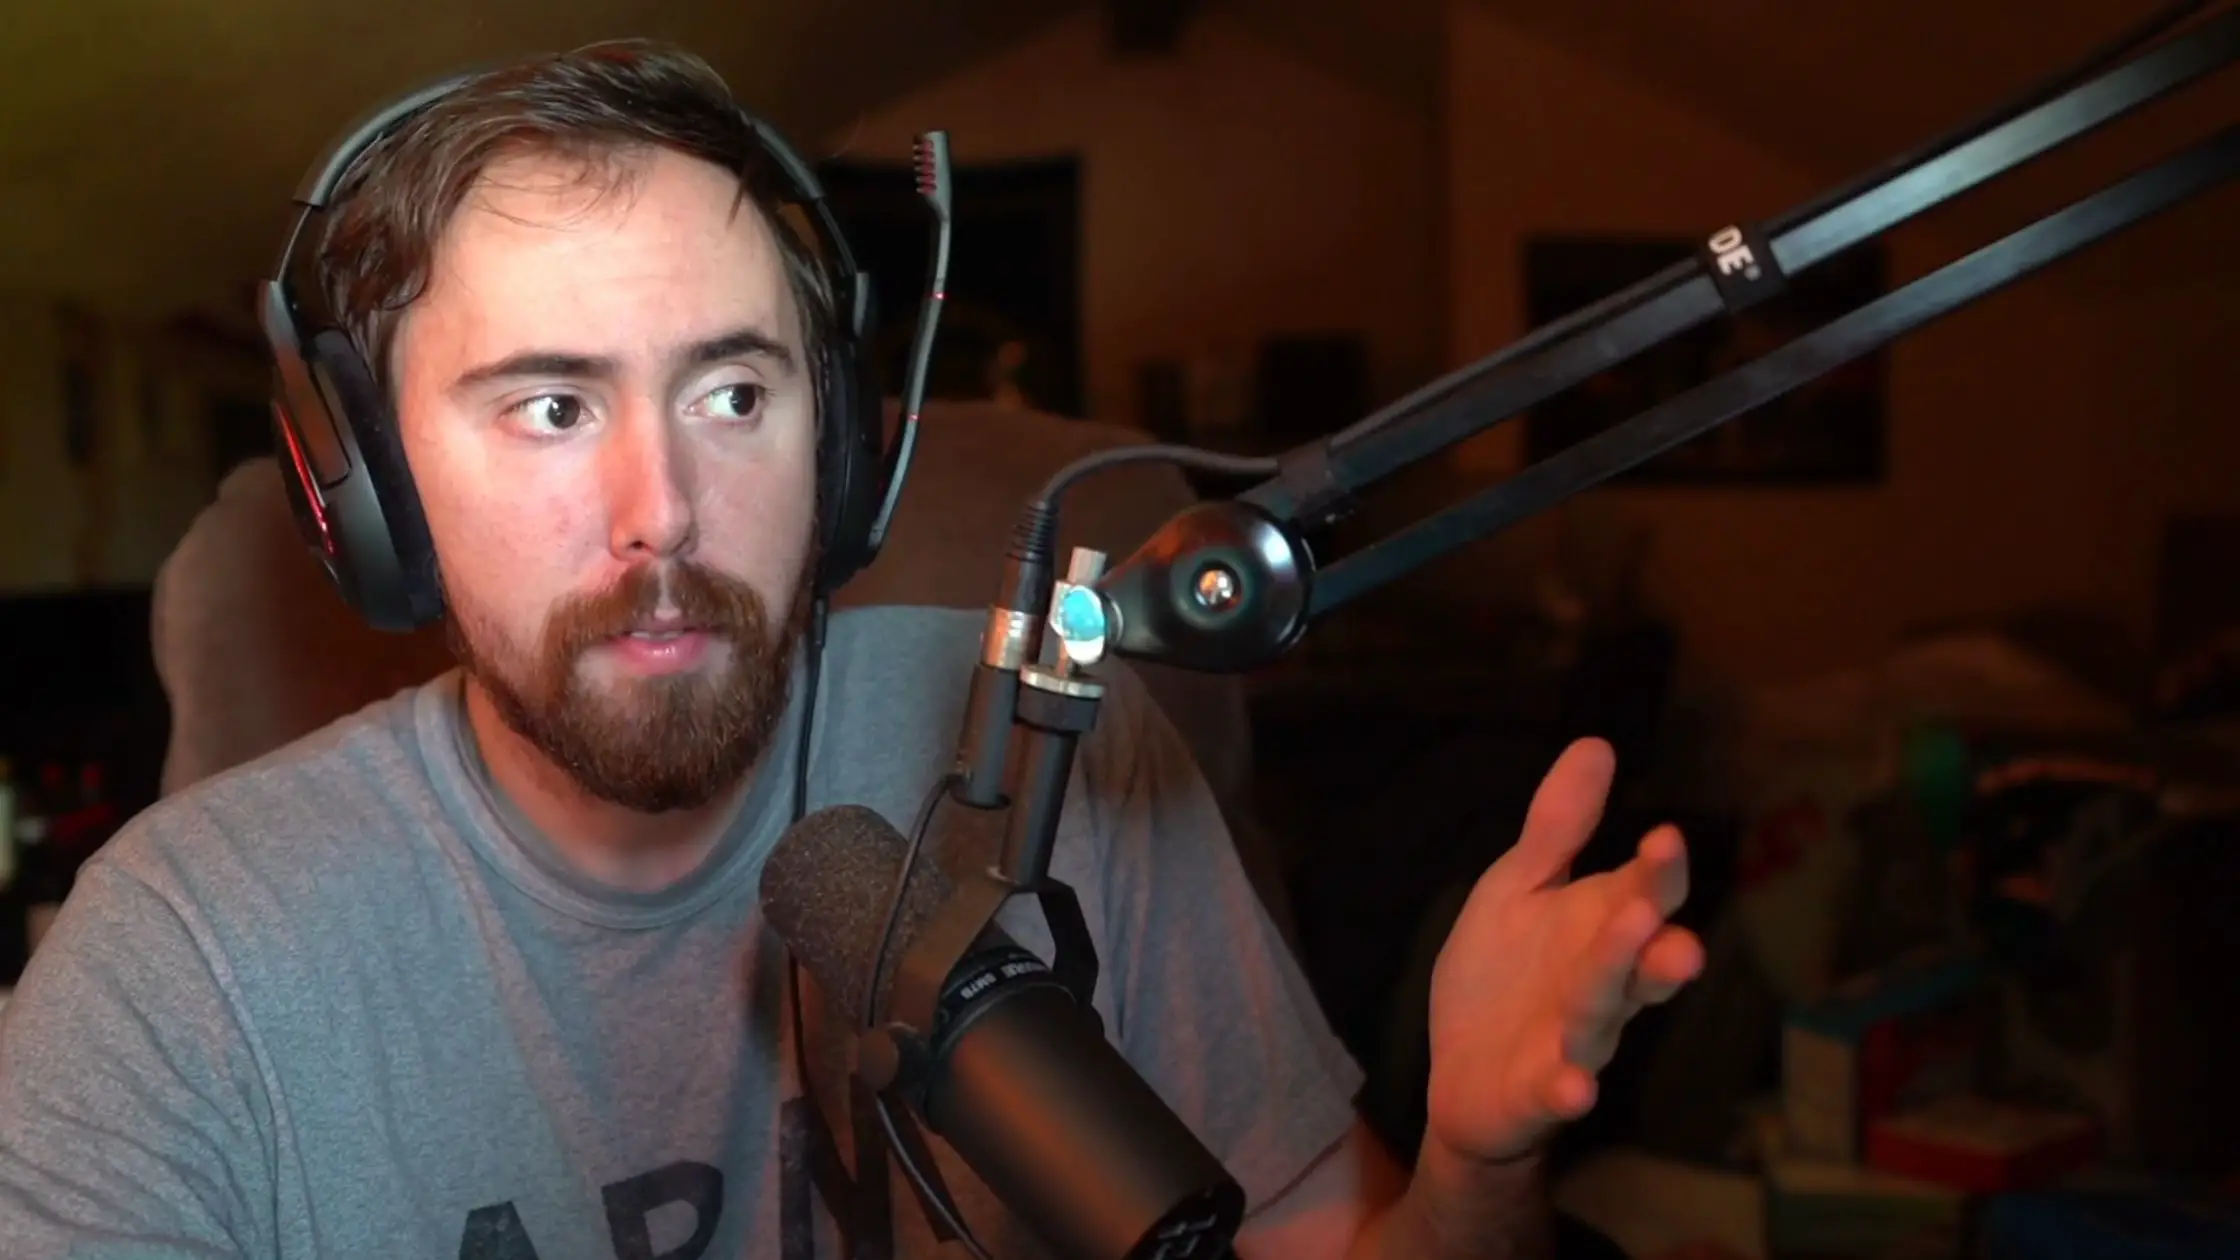 is-asmongold-really-quitting-twitch-is-he-moving-to-another-platform